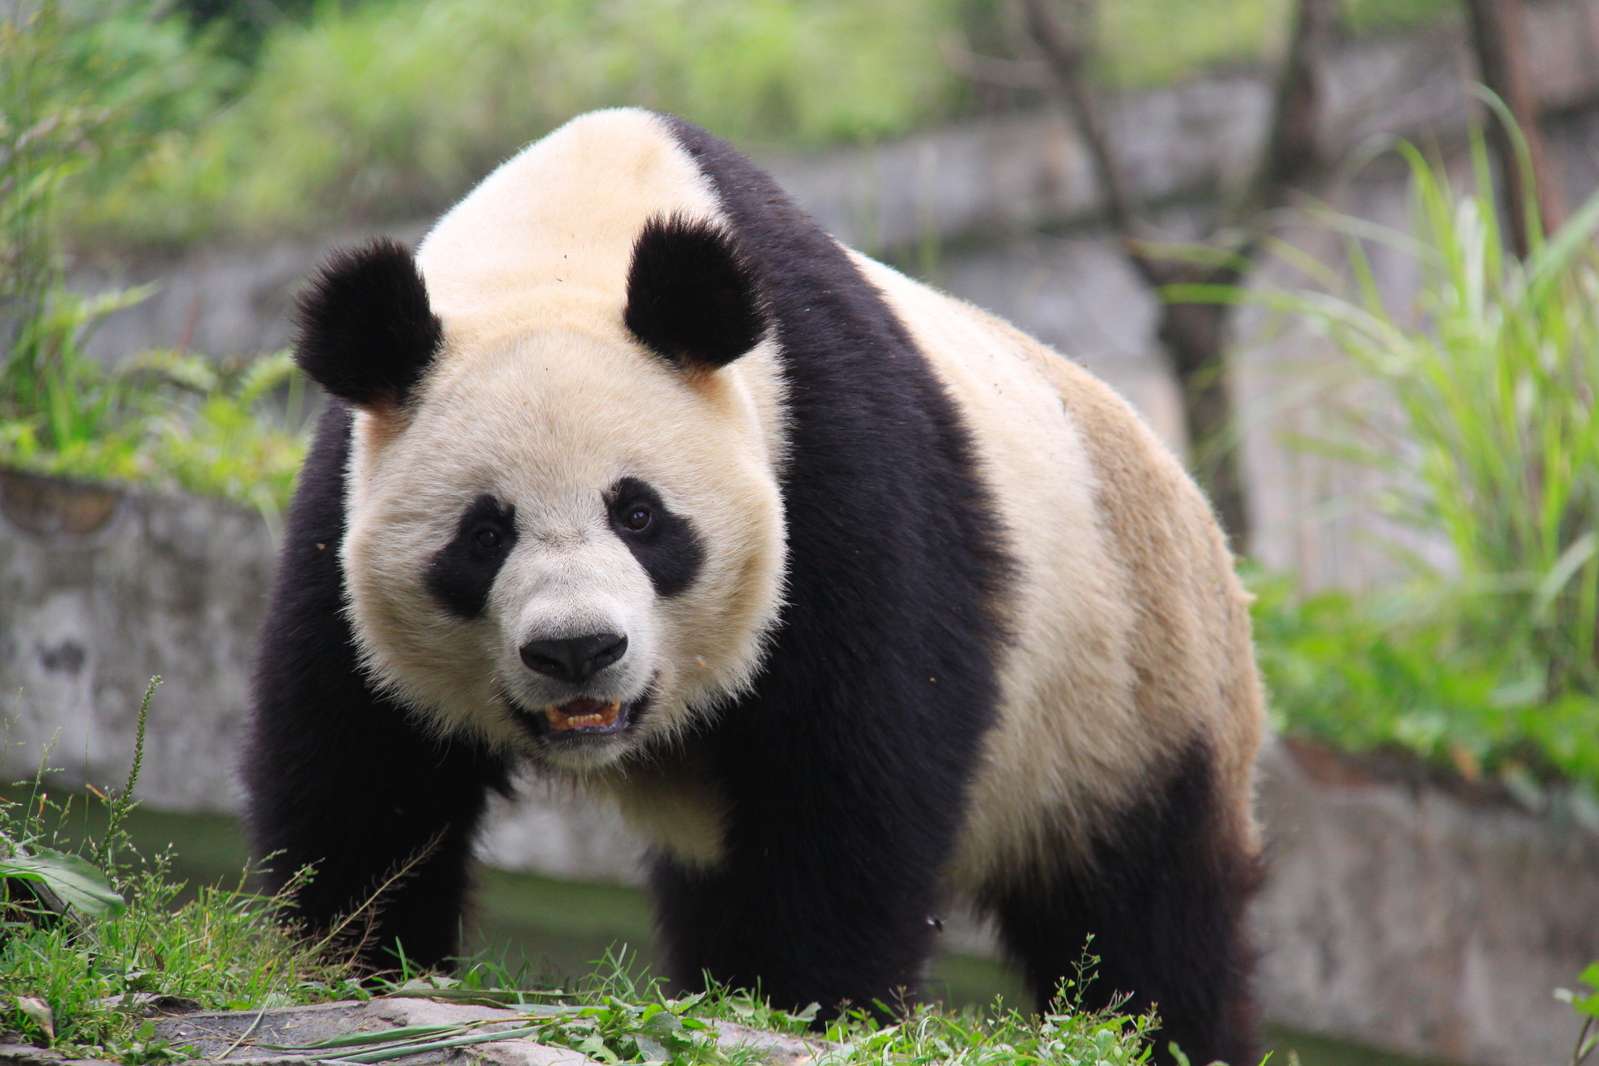 dominant panda standing with noticeable back hump, Asia, China